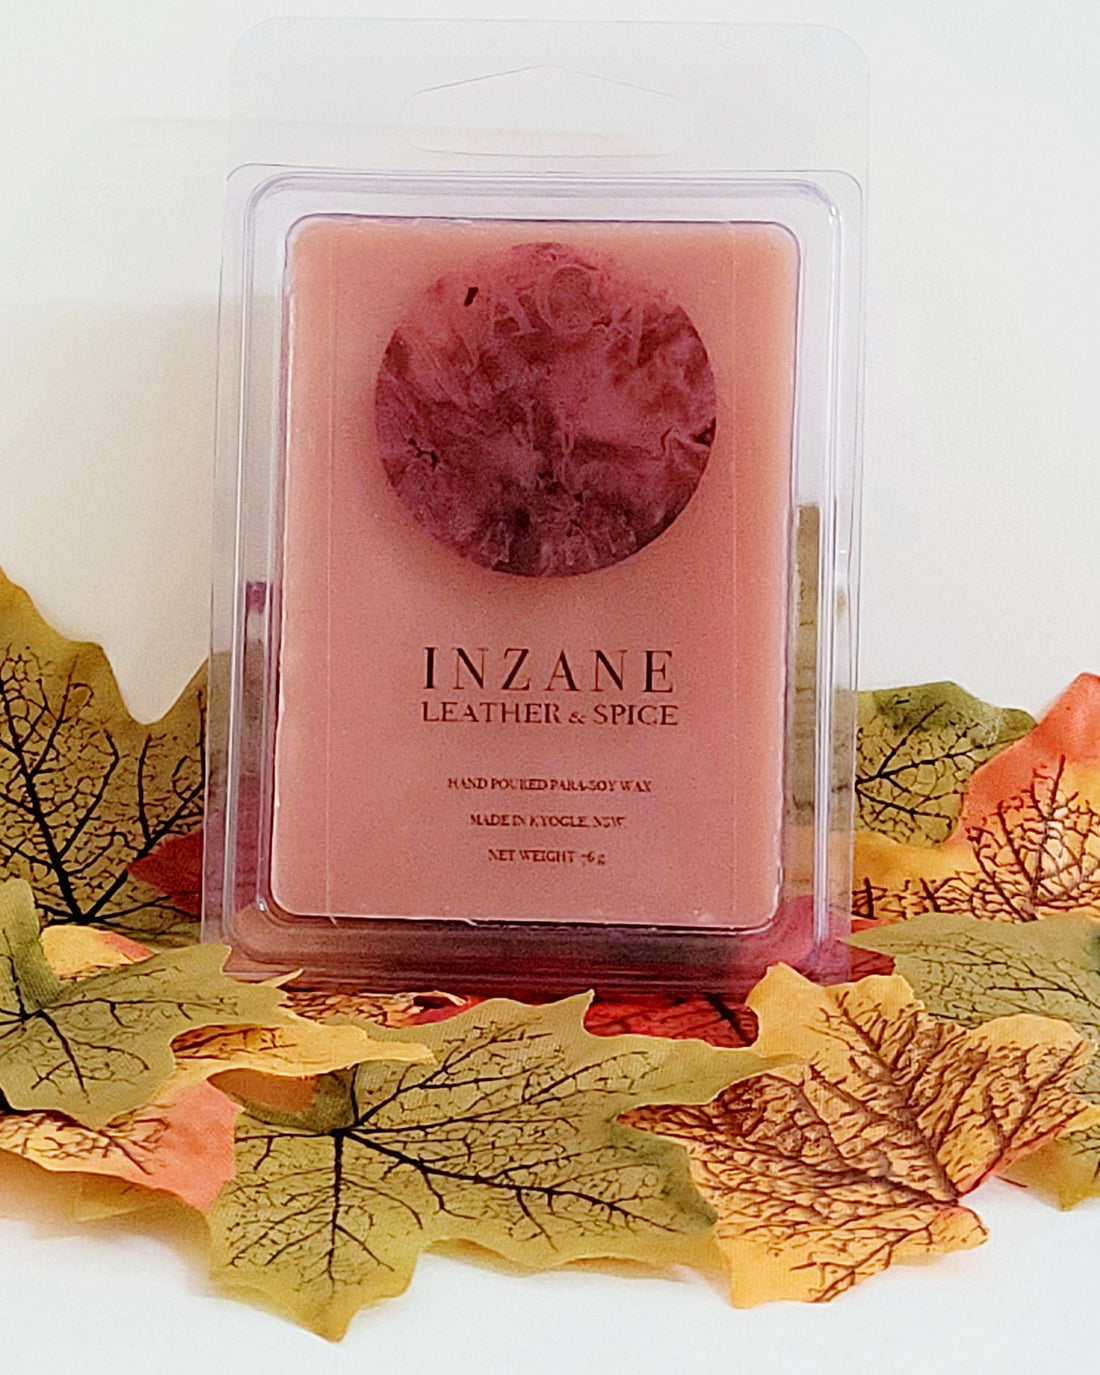 INZANE (Leather & Spice)